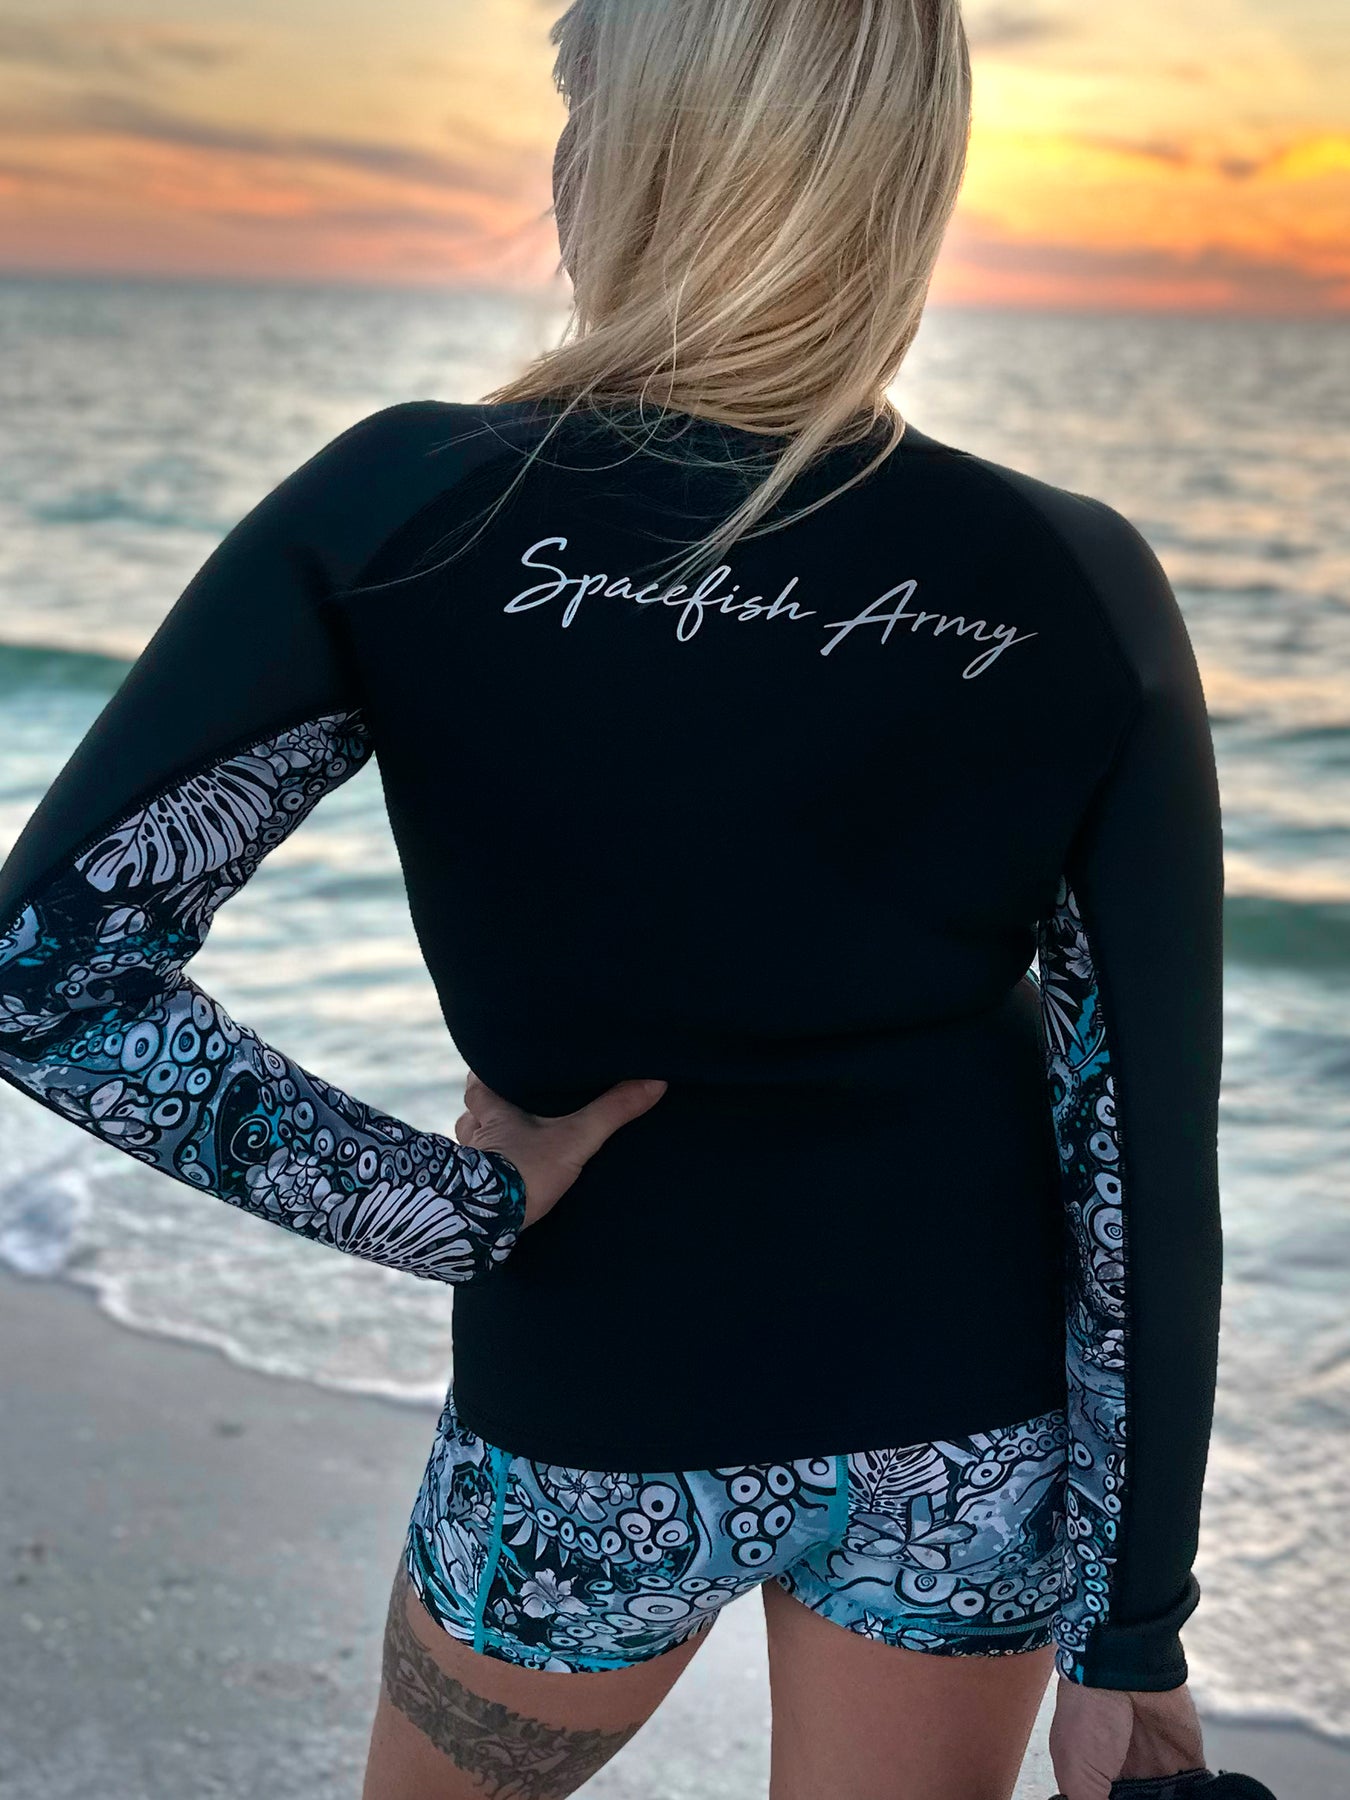 Spacefish Army - Unique Eco Friendly SPF Clothing for Scuba Divers